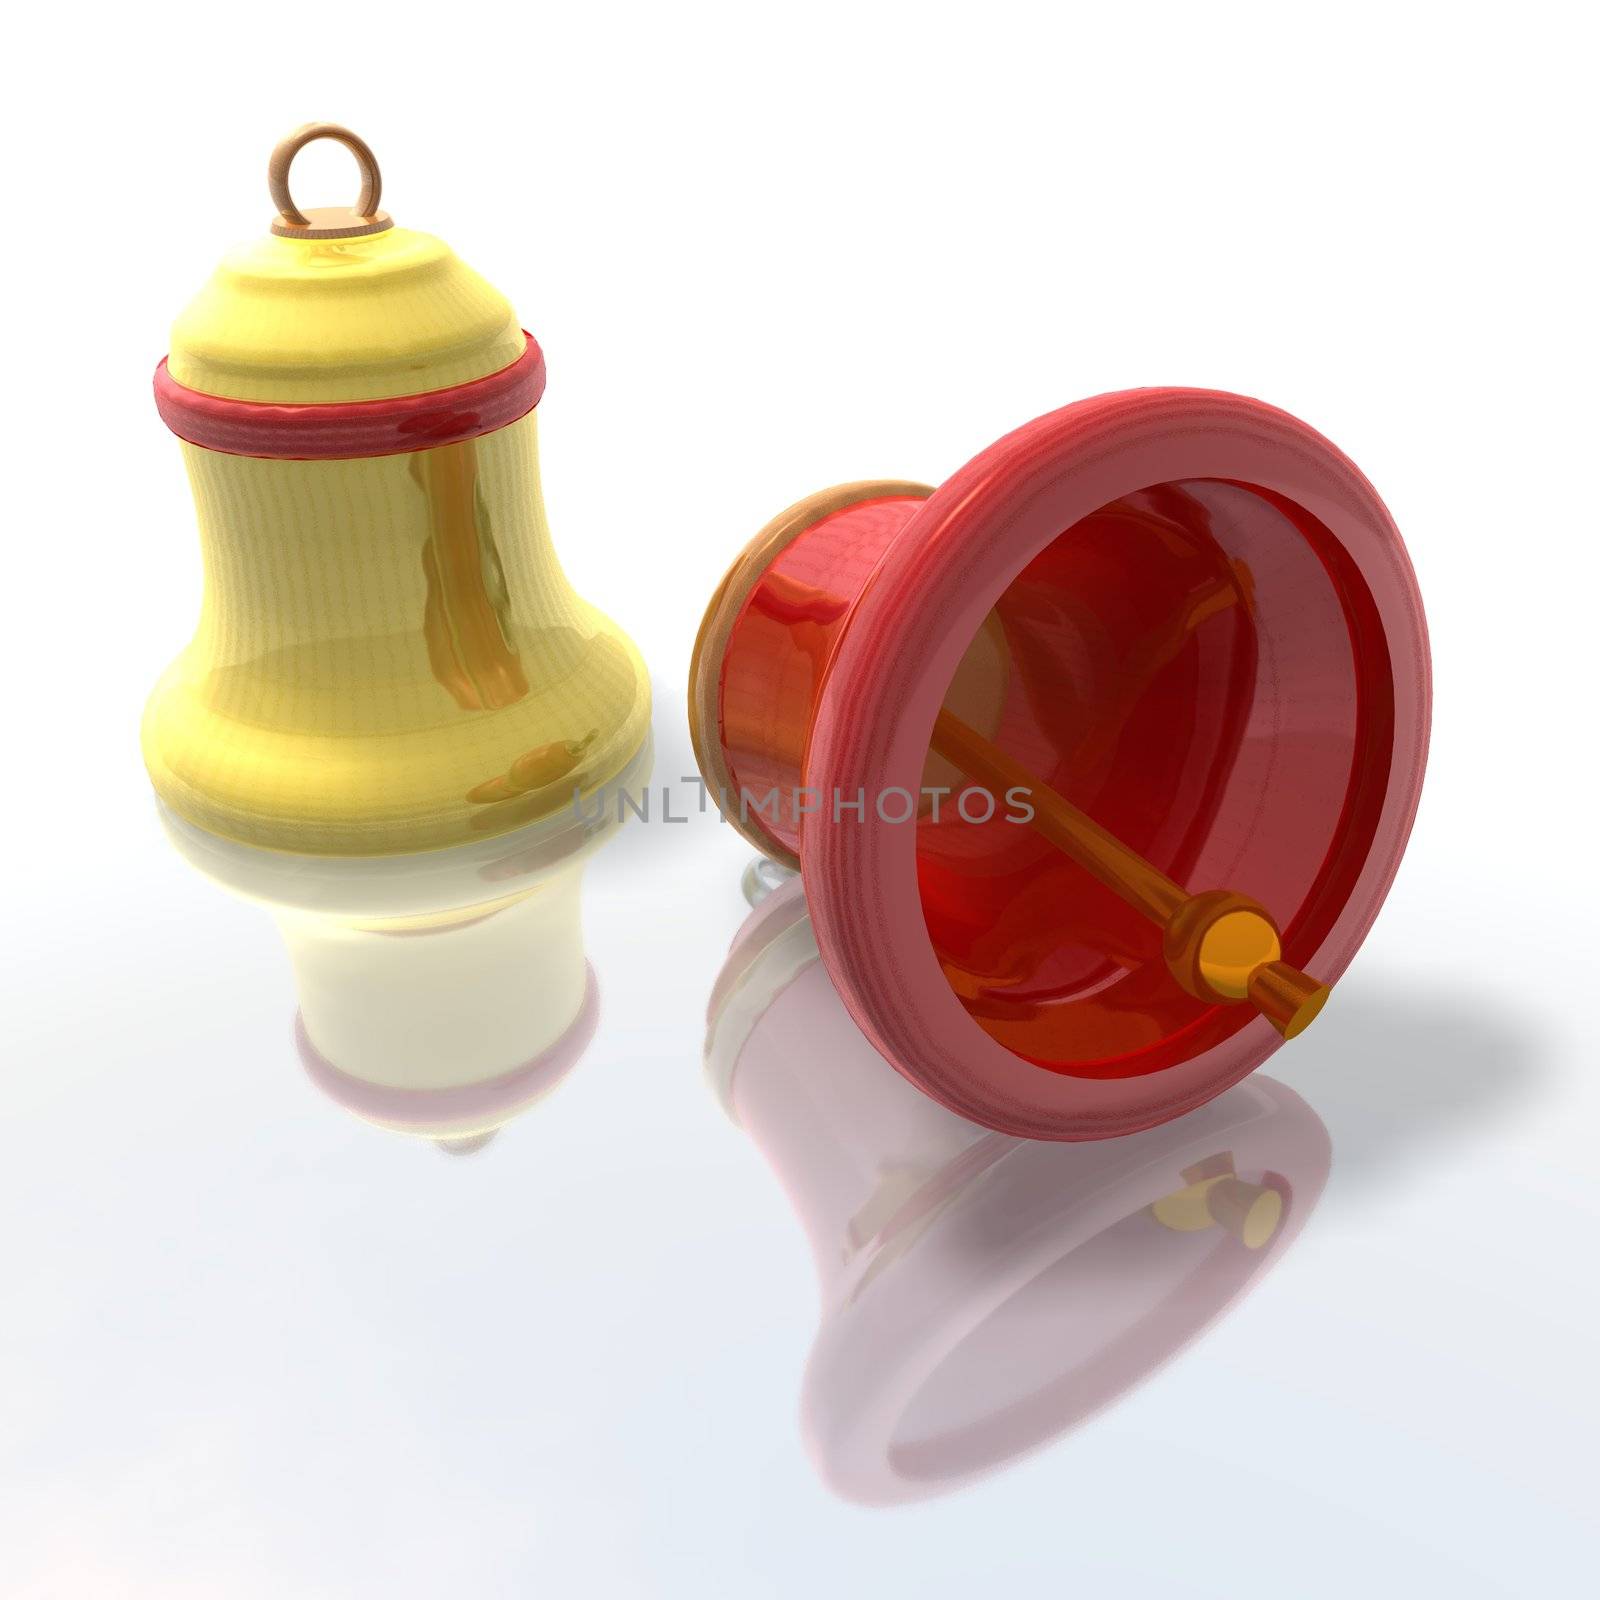 a 3Drender of some yellow and red bells with reflection